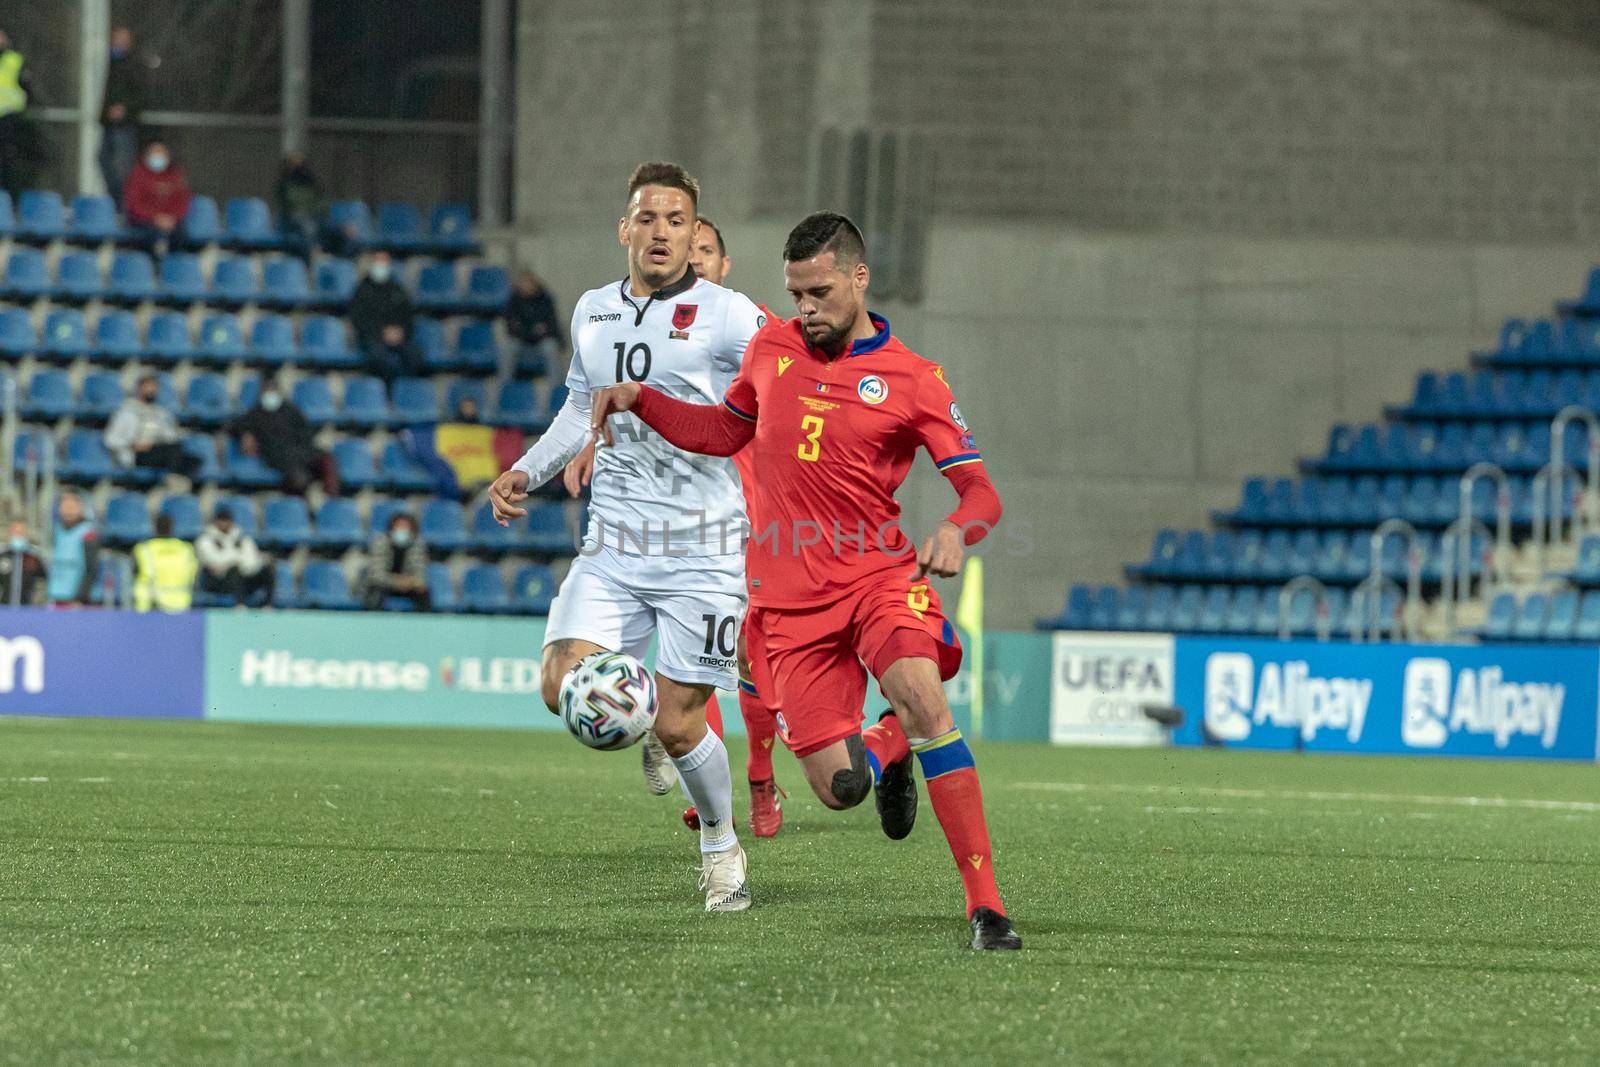 Andorra La Vella, Andorra : 2021 March 25 : Marce Vales AND in the Qatar 2022 World Cup Qualifying match.